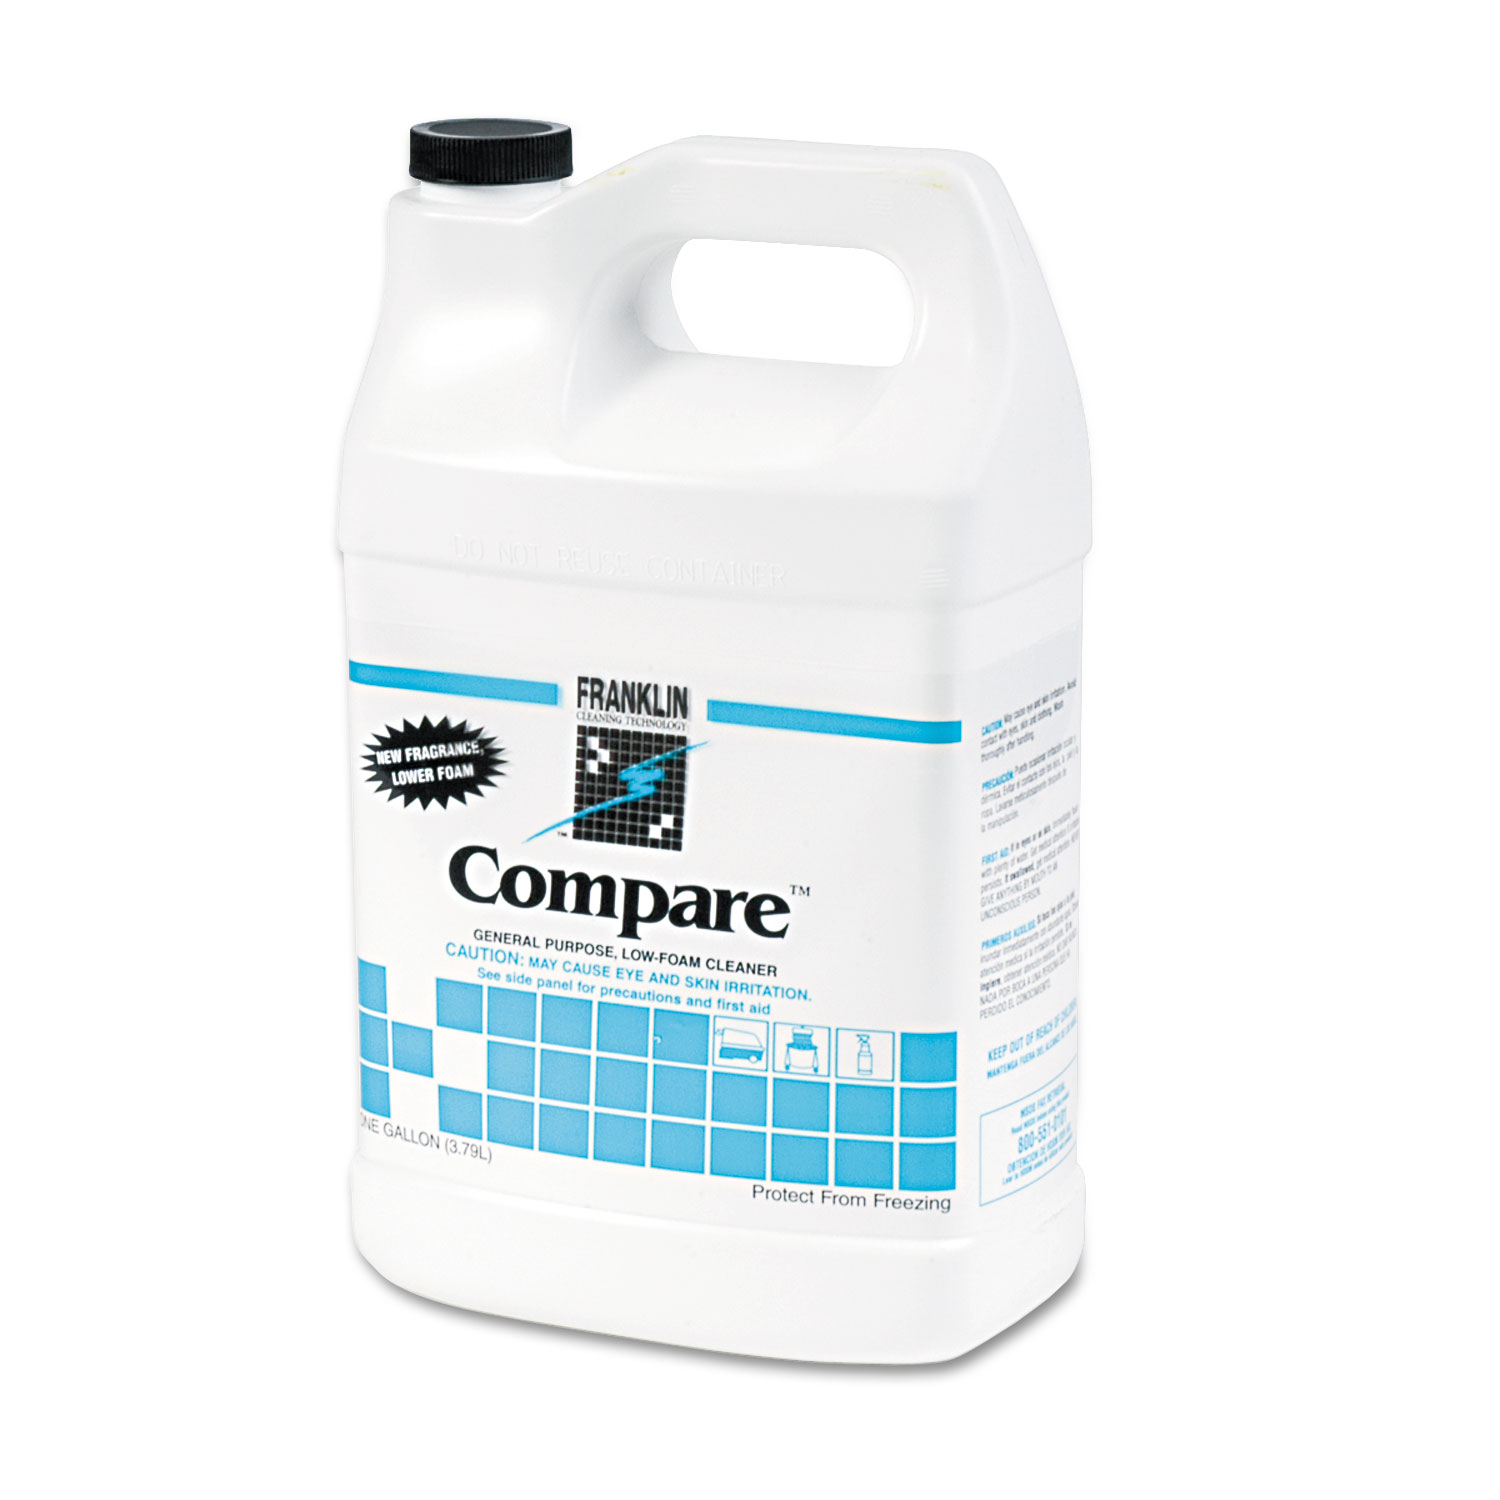 Compare Floor Cleaner, 1gal Bottle